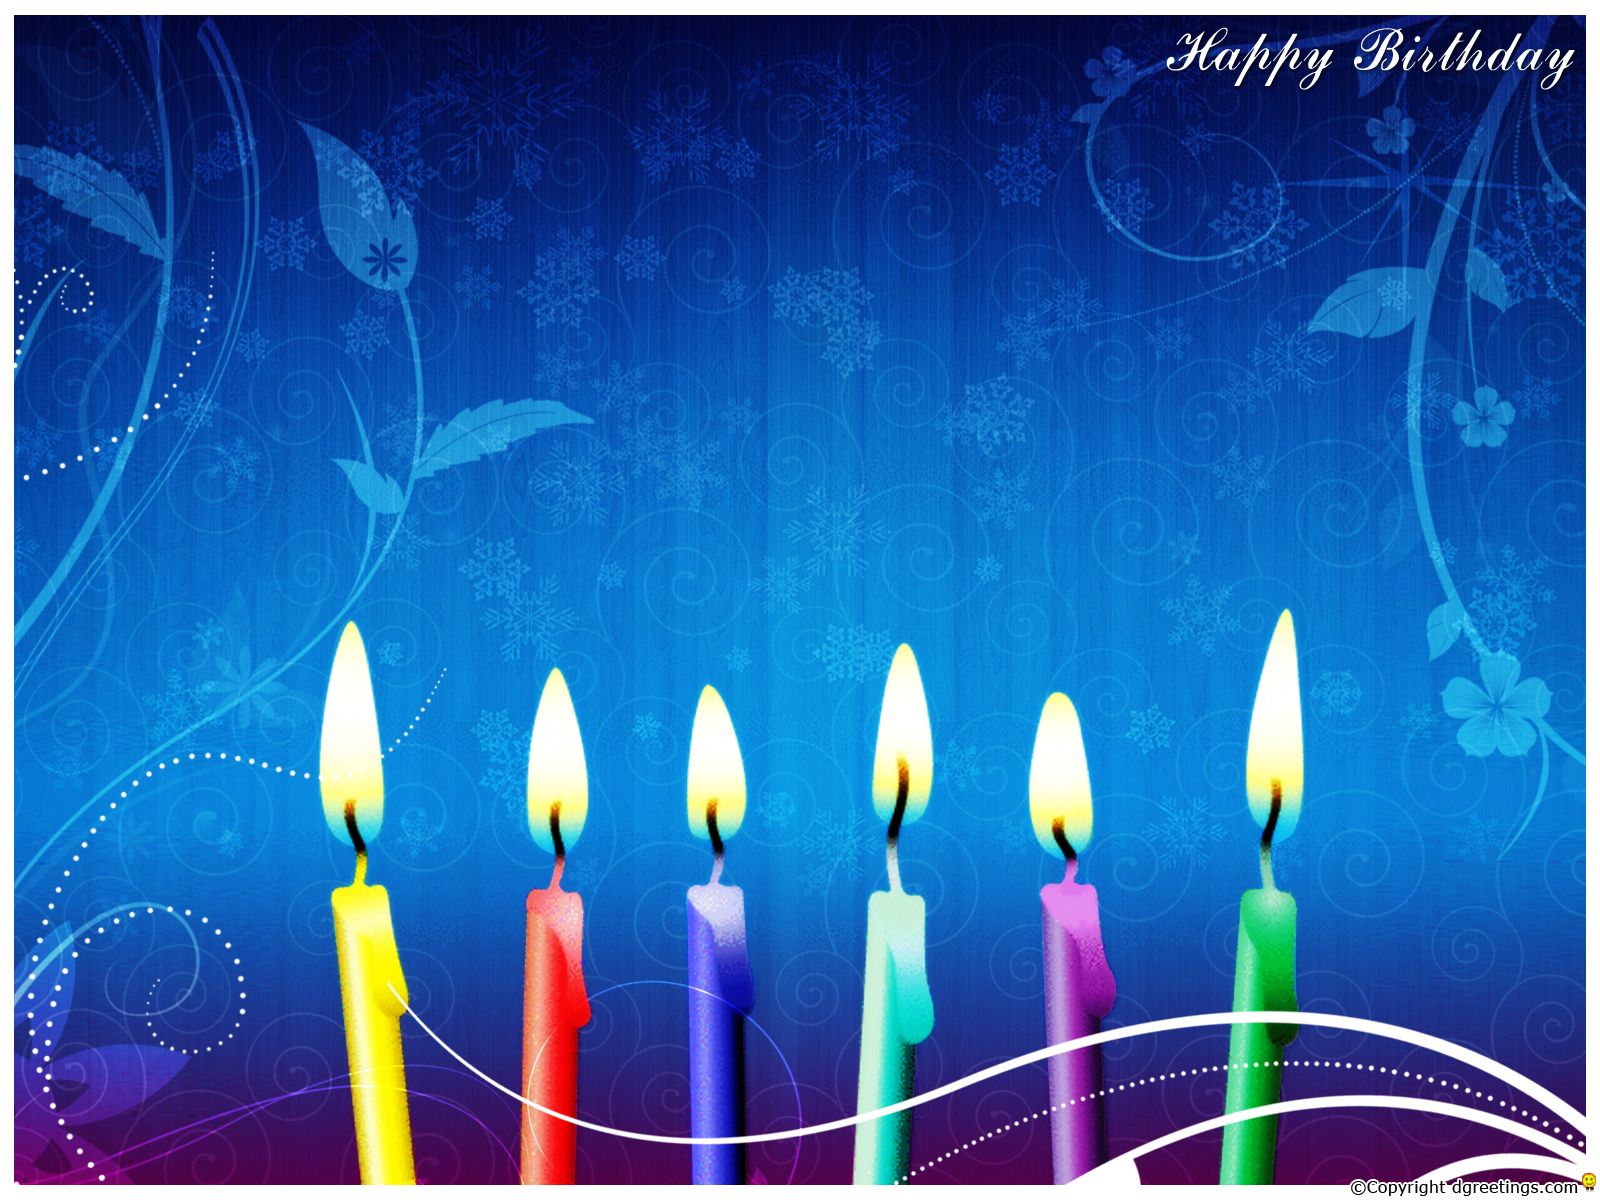 Mobile wallpaper: Holiday, Candle, Birthday, Happy Birthday, 622353 download the picture for free